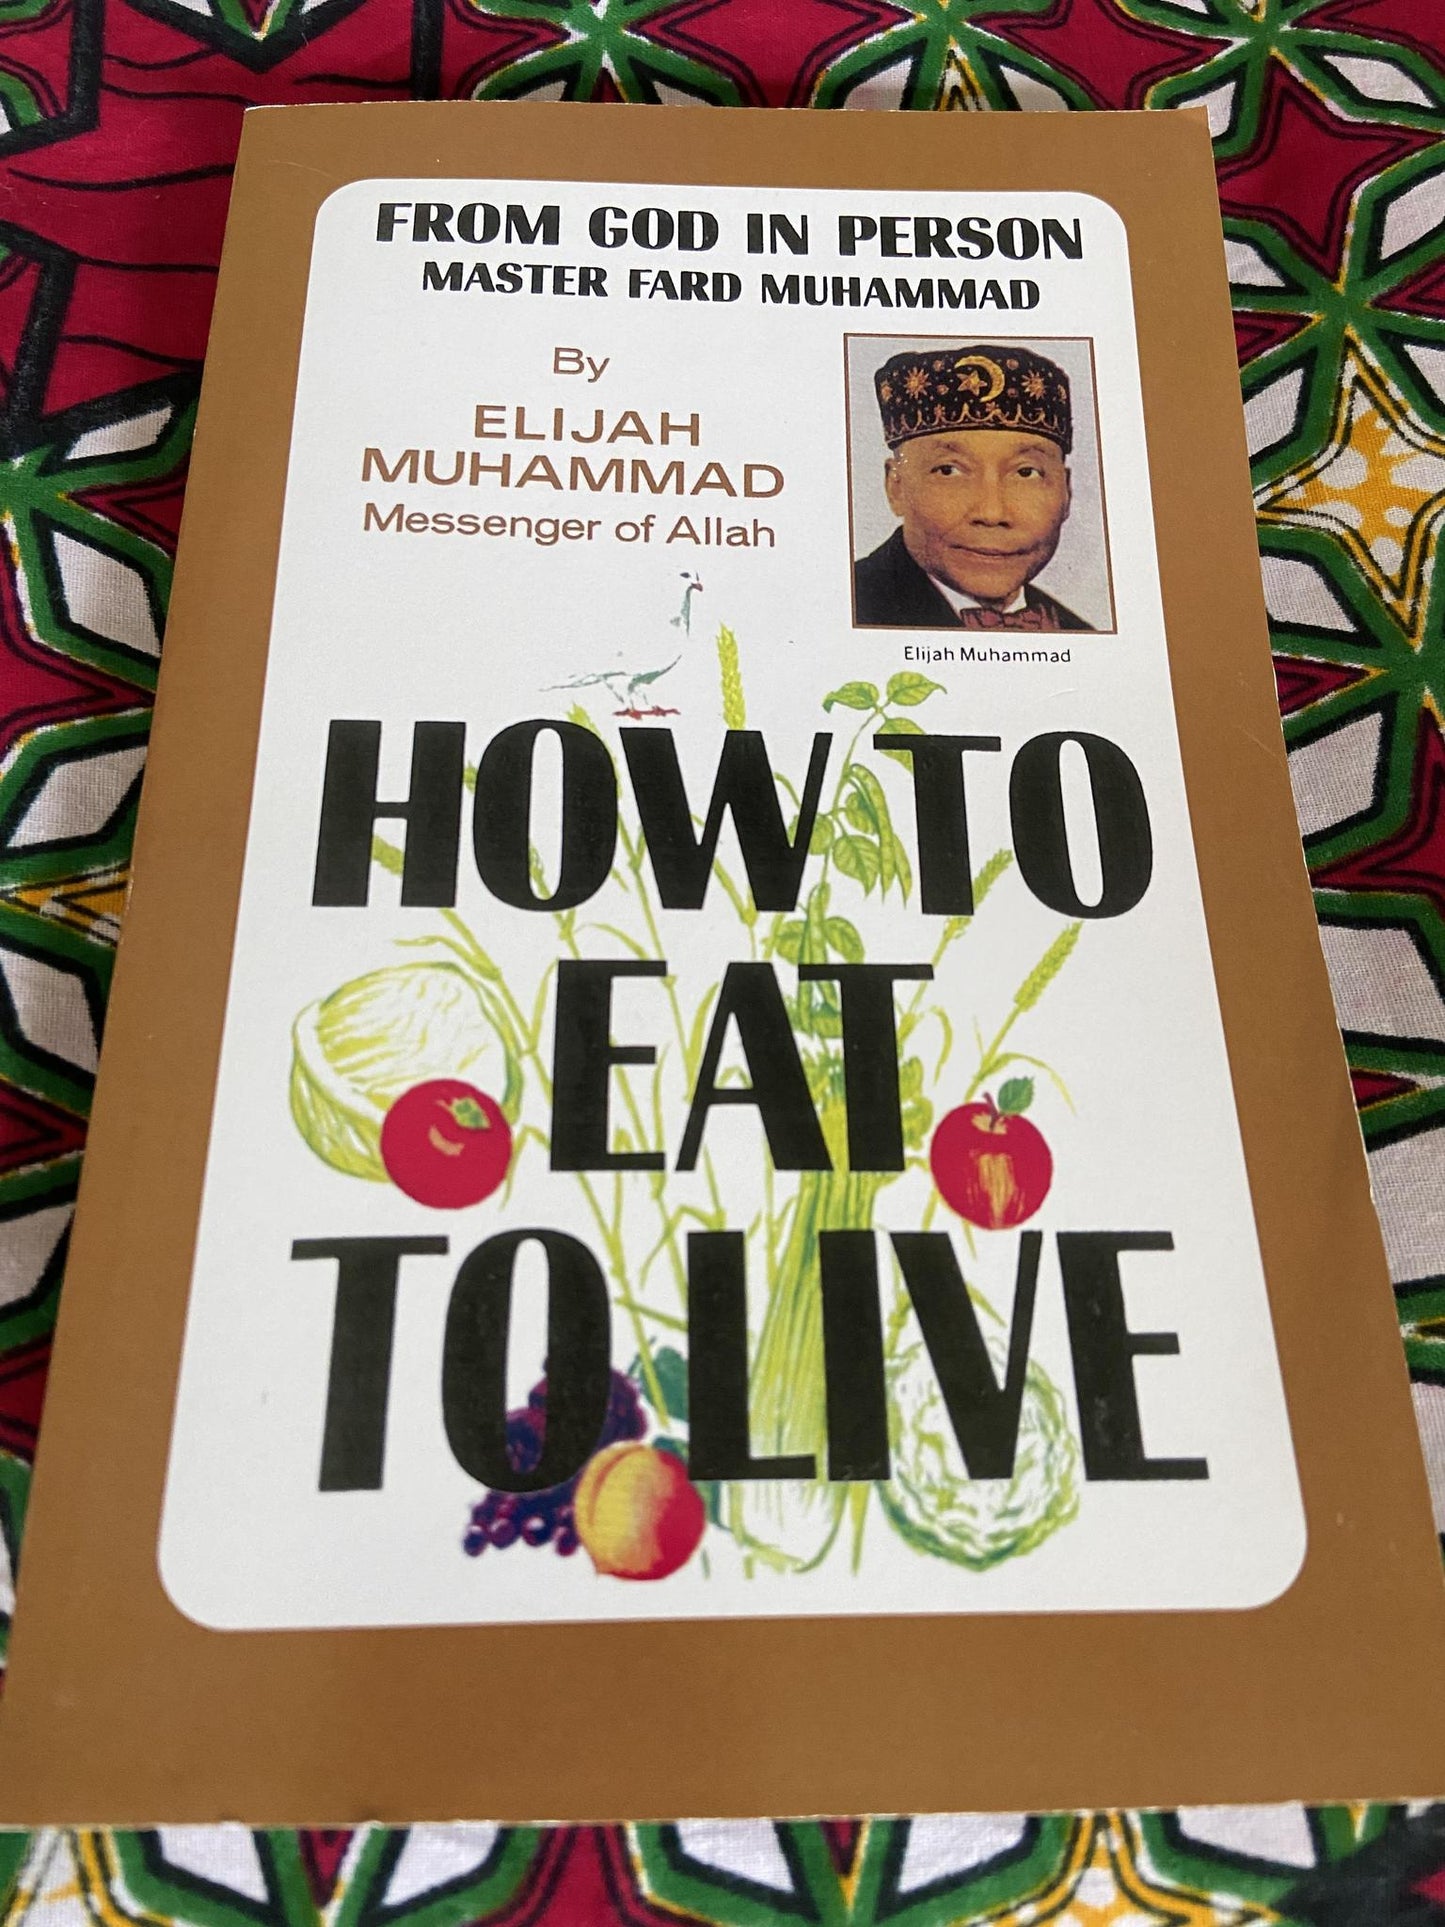 "How to Eat to Live Vol. 2" by Elijah Muhammad